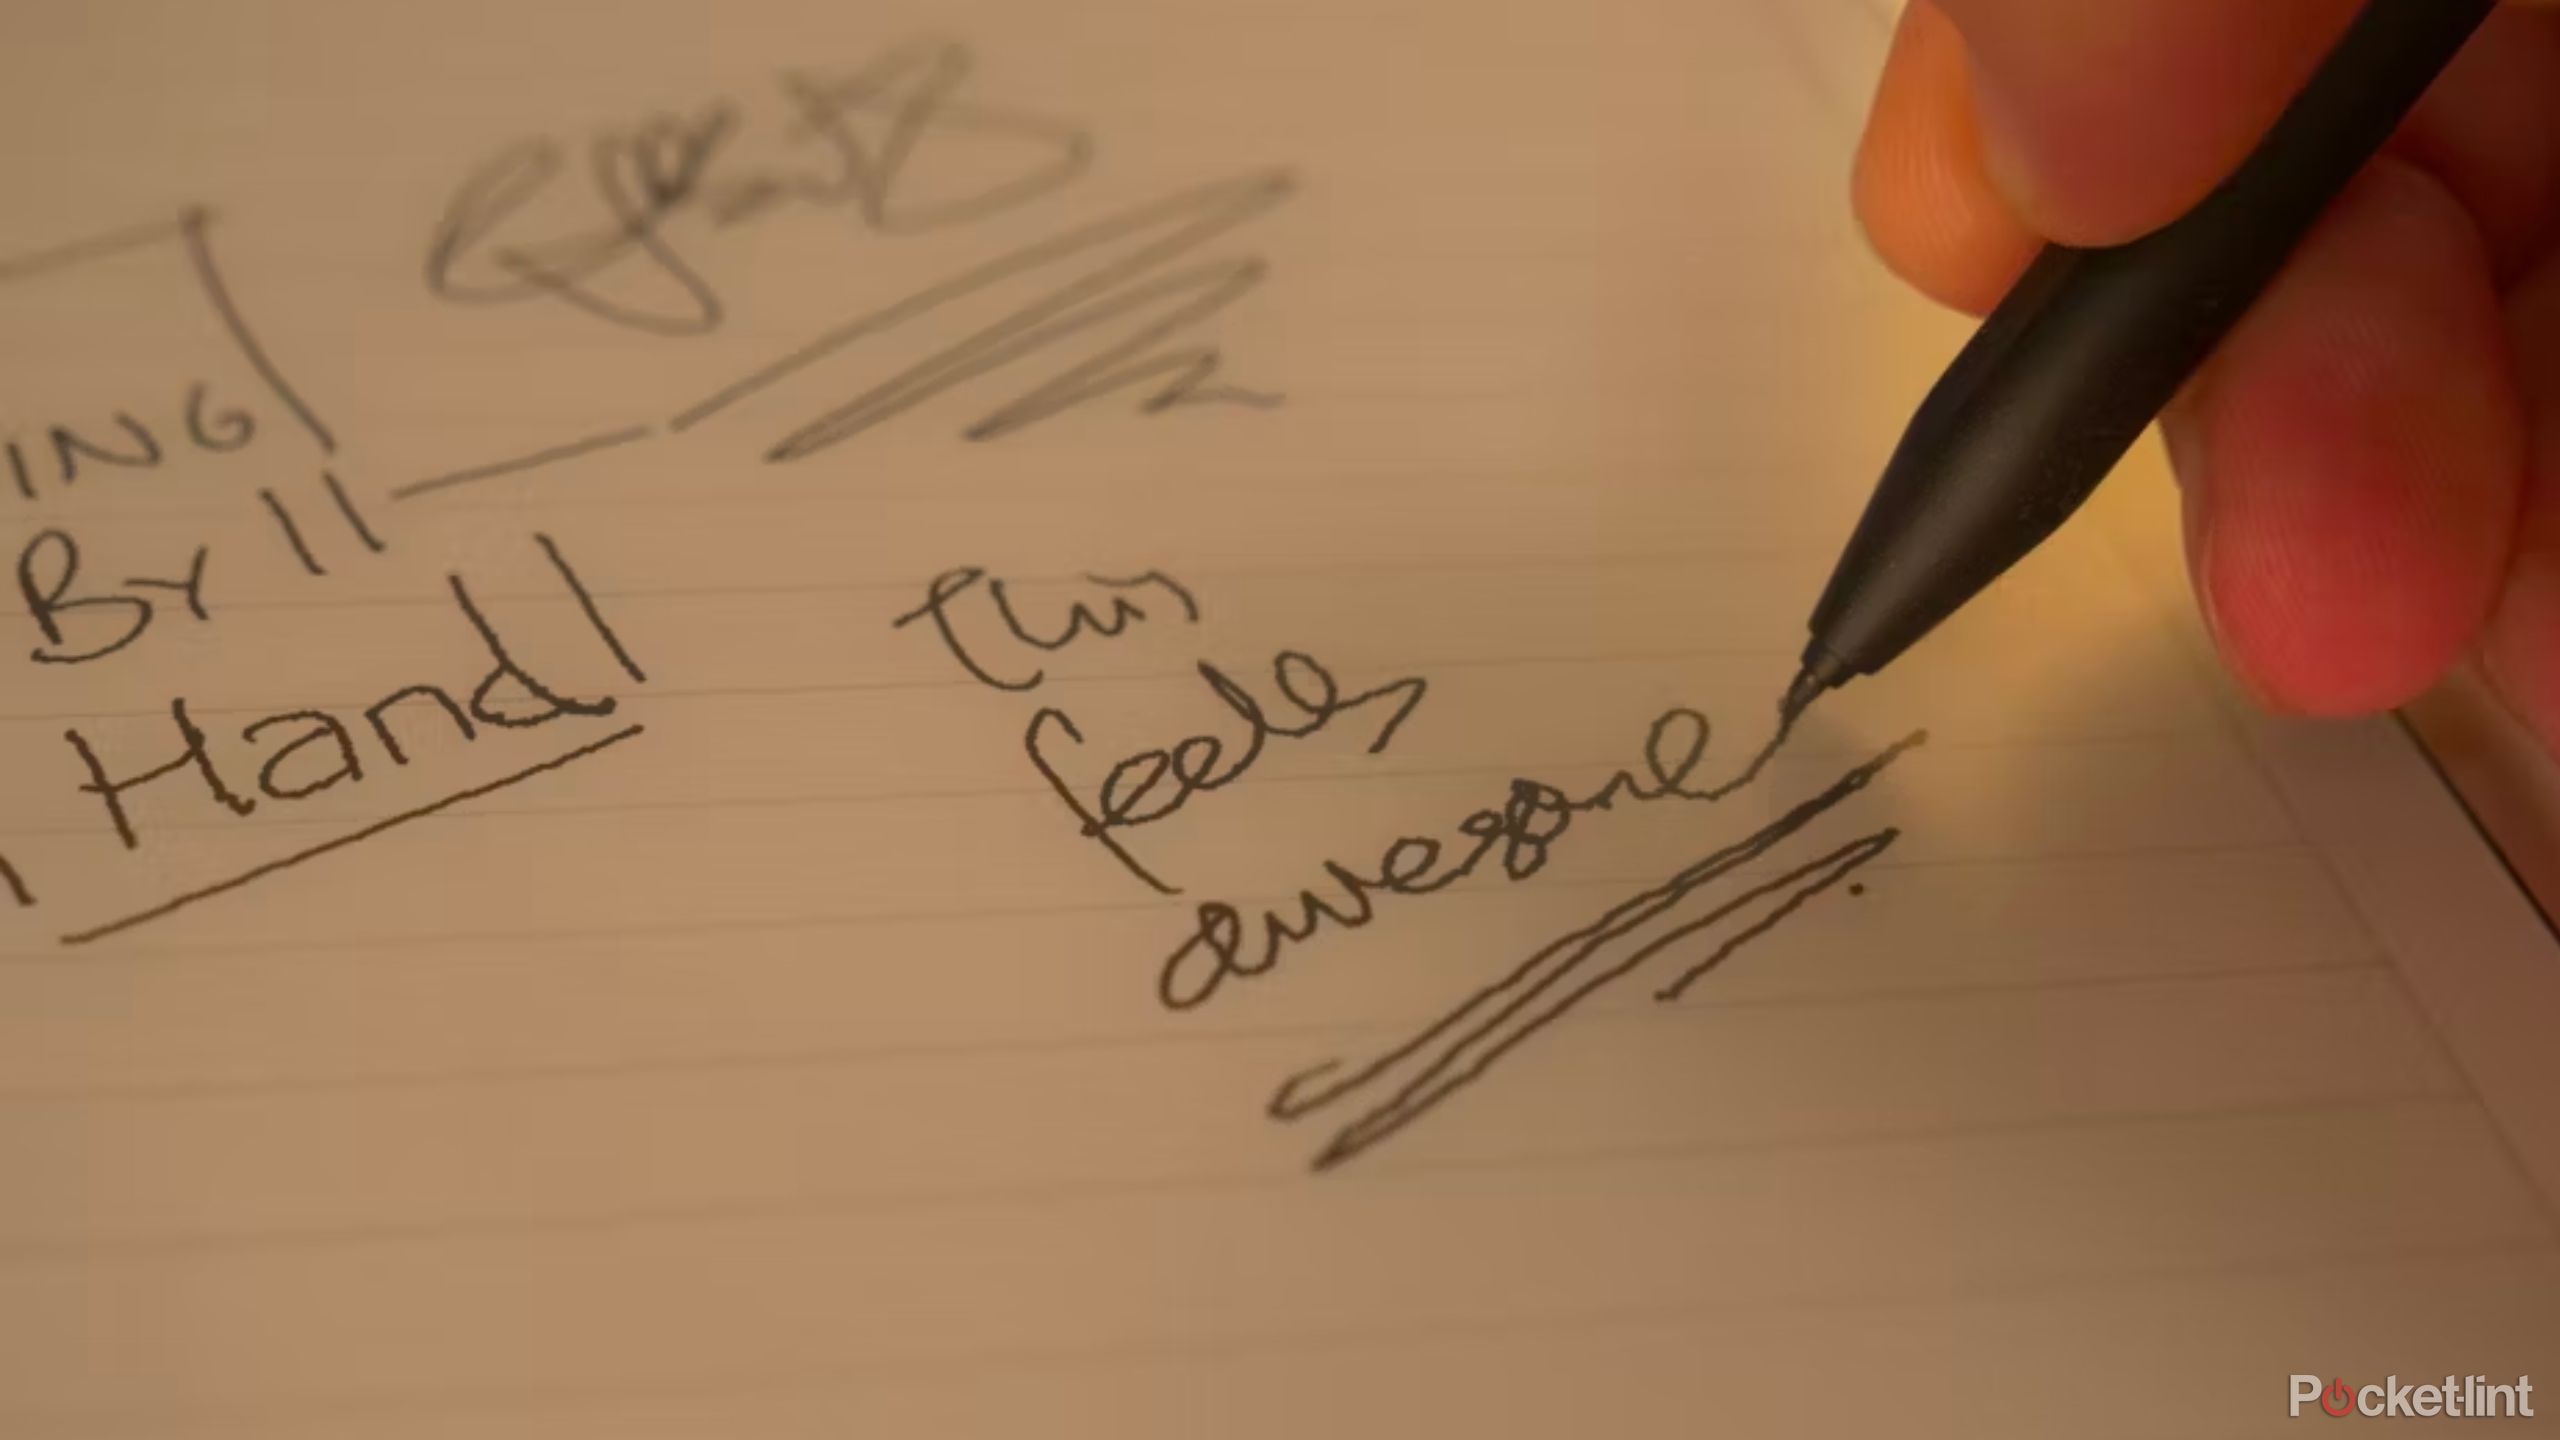 Best note-taking tablets thumbnail image